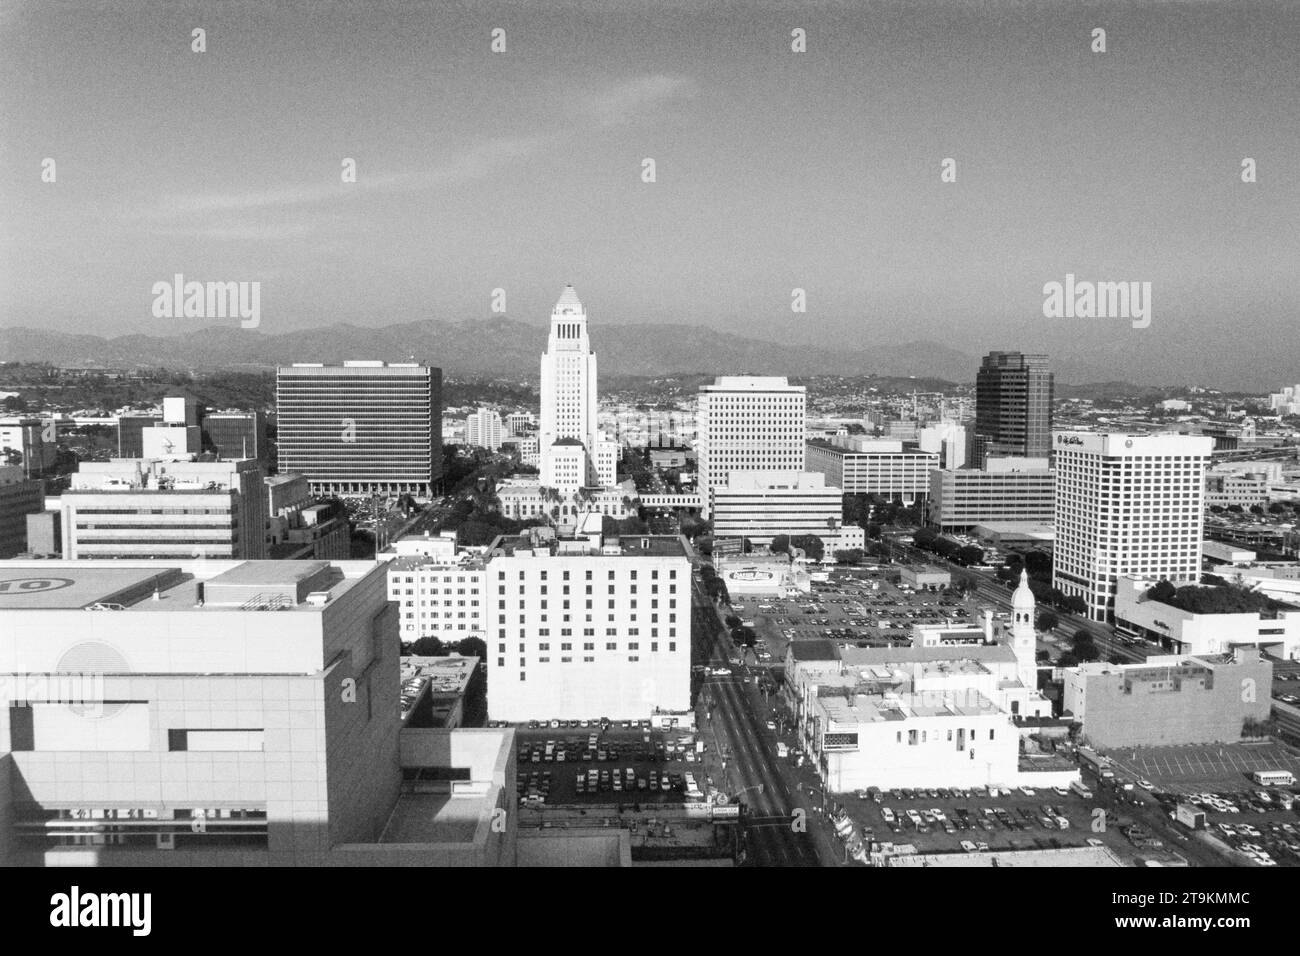 Los Angeles, California, USA - November 1, 1992  Grainy black and white editorial view of Los Angeles city hall and nearby buildings.  Shot on film. Stock Photo